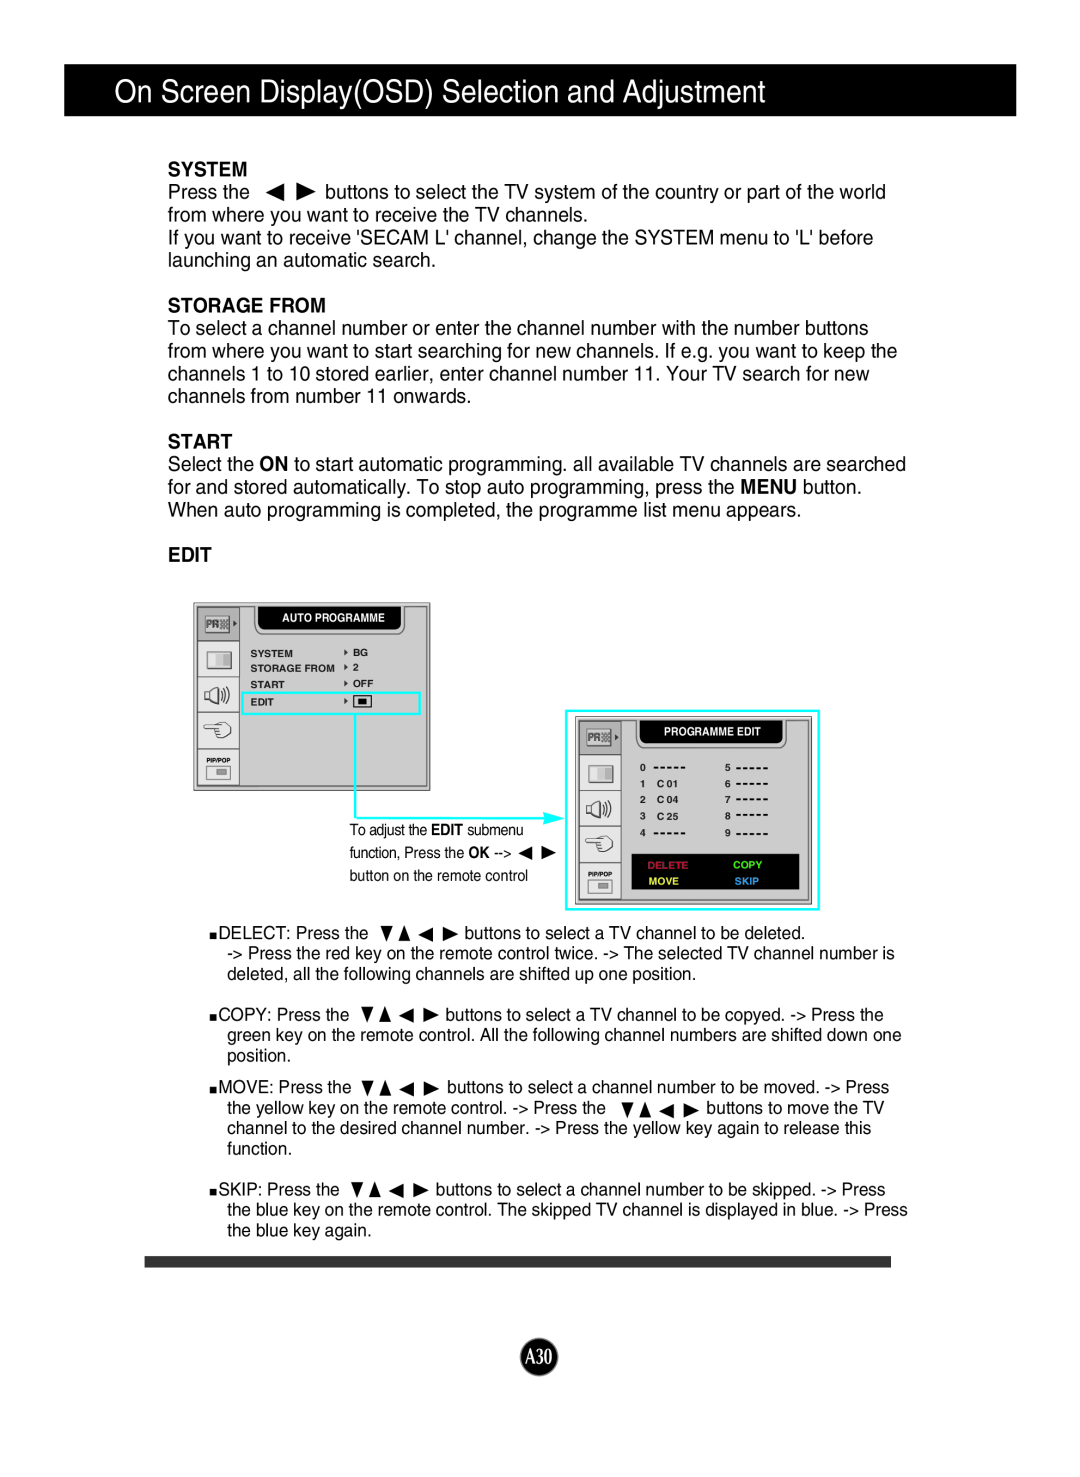 LG Electronics L2323T manual On Screen DisplayOSD Selection and Adjustment, System, Storage From, Start, Edit 